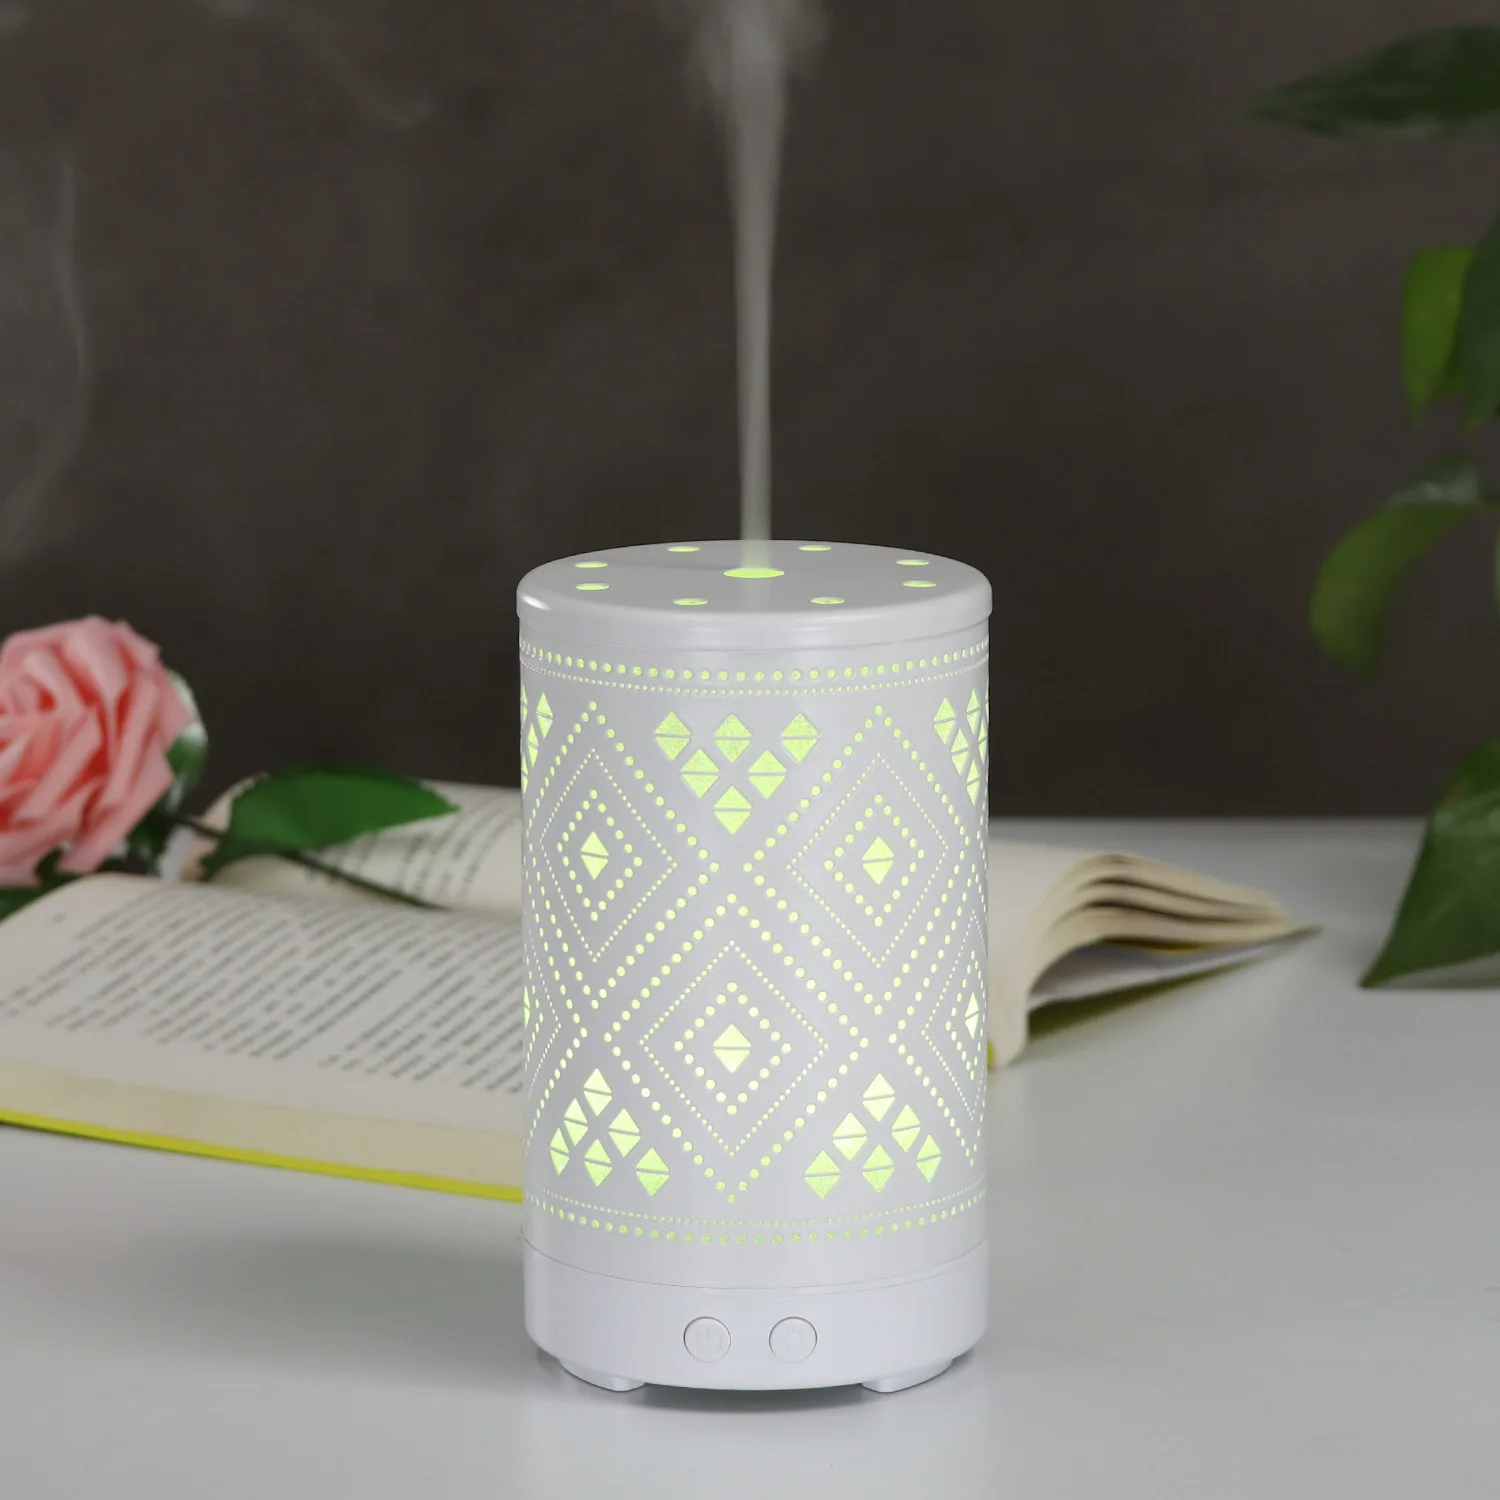 New Products Iron Art Ultrasonic Atomization Expansion Essential Oil Fragrance Lamp Household Hollow out Translucent Aromatherap